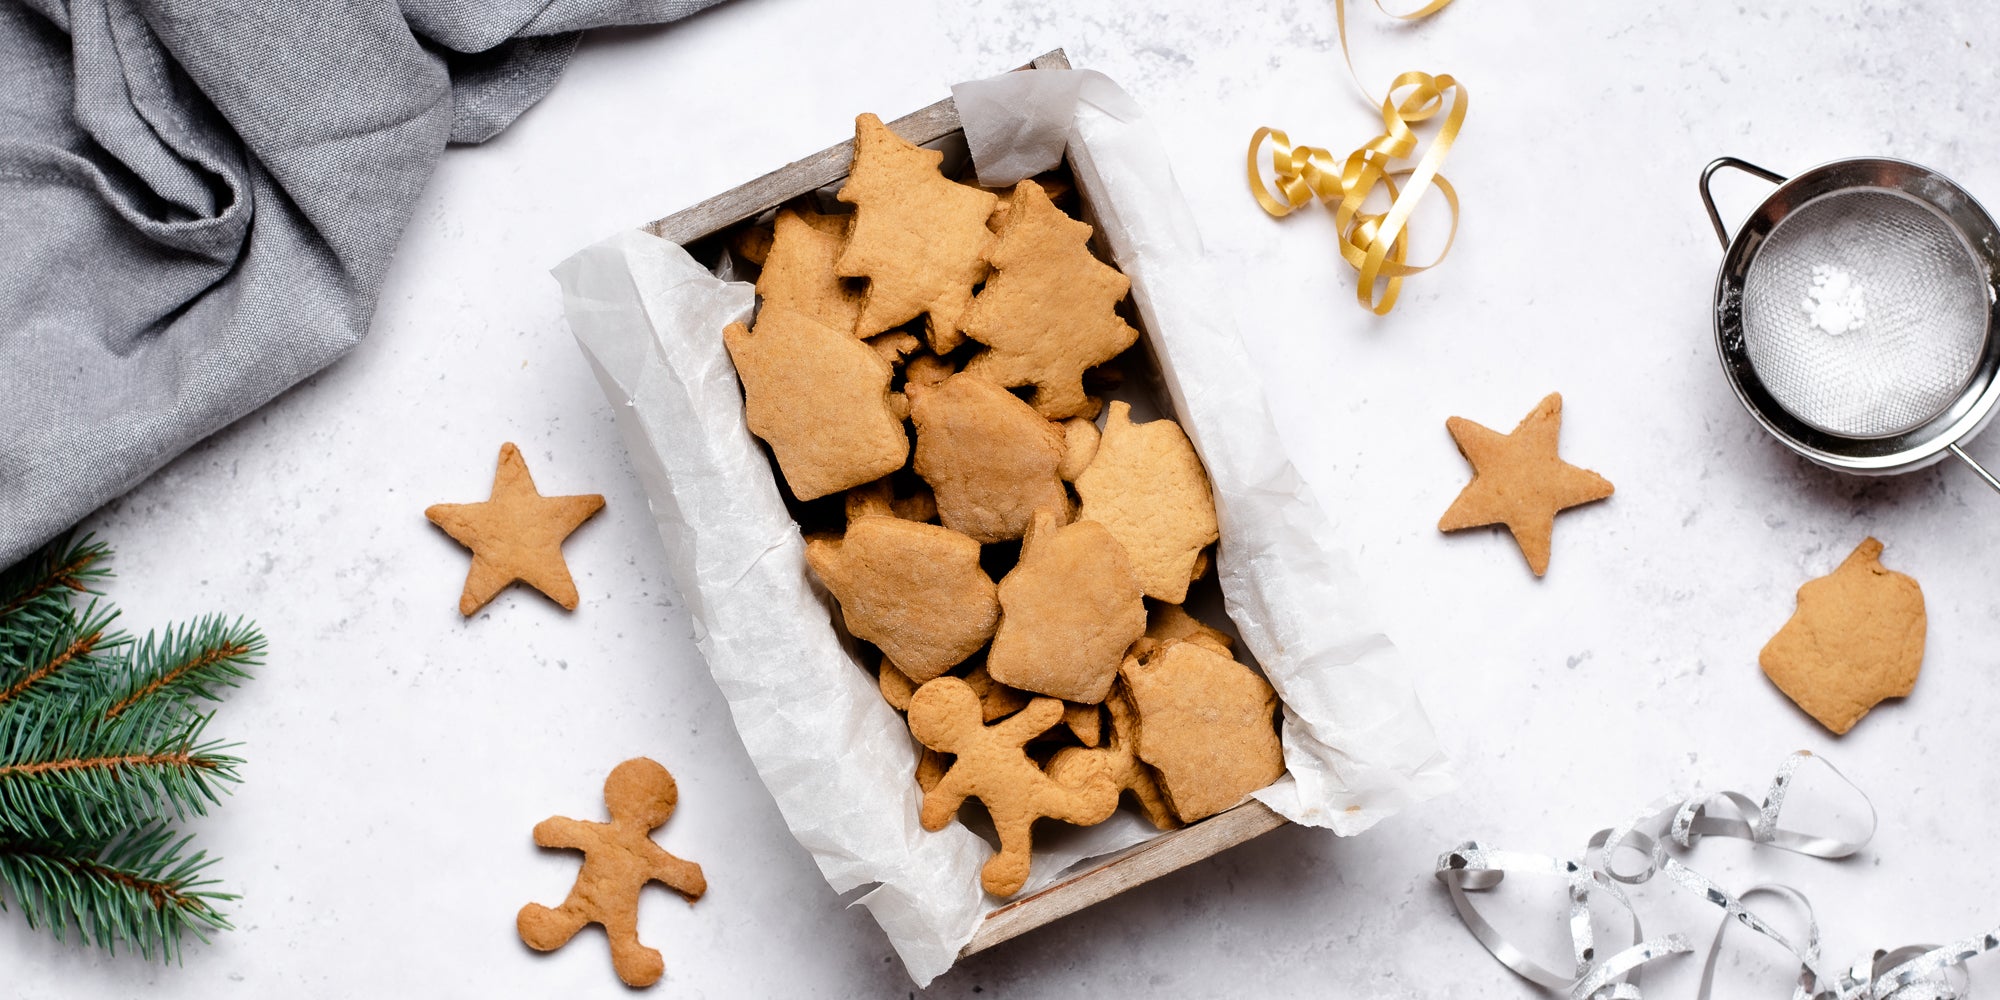 Top down view of vegan gingerbread men and stars in a box